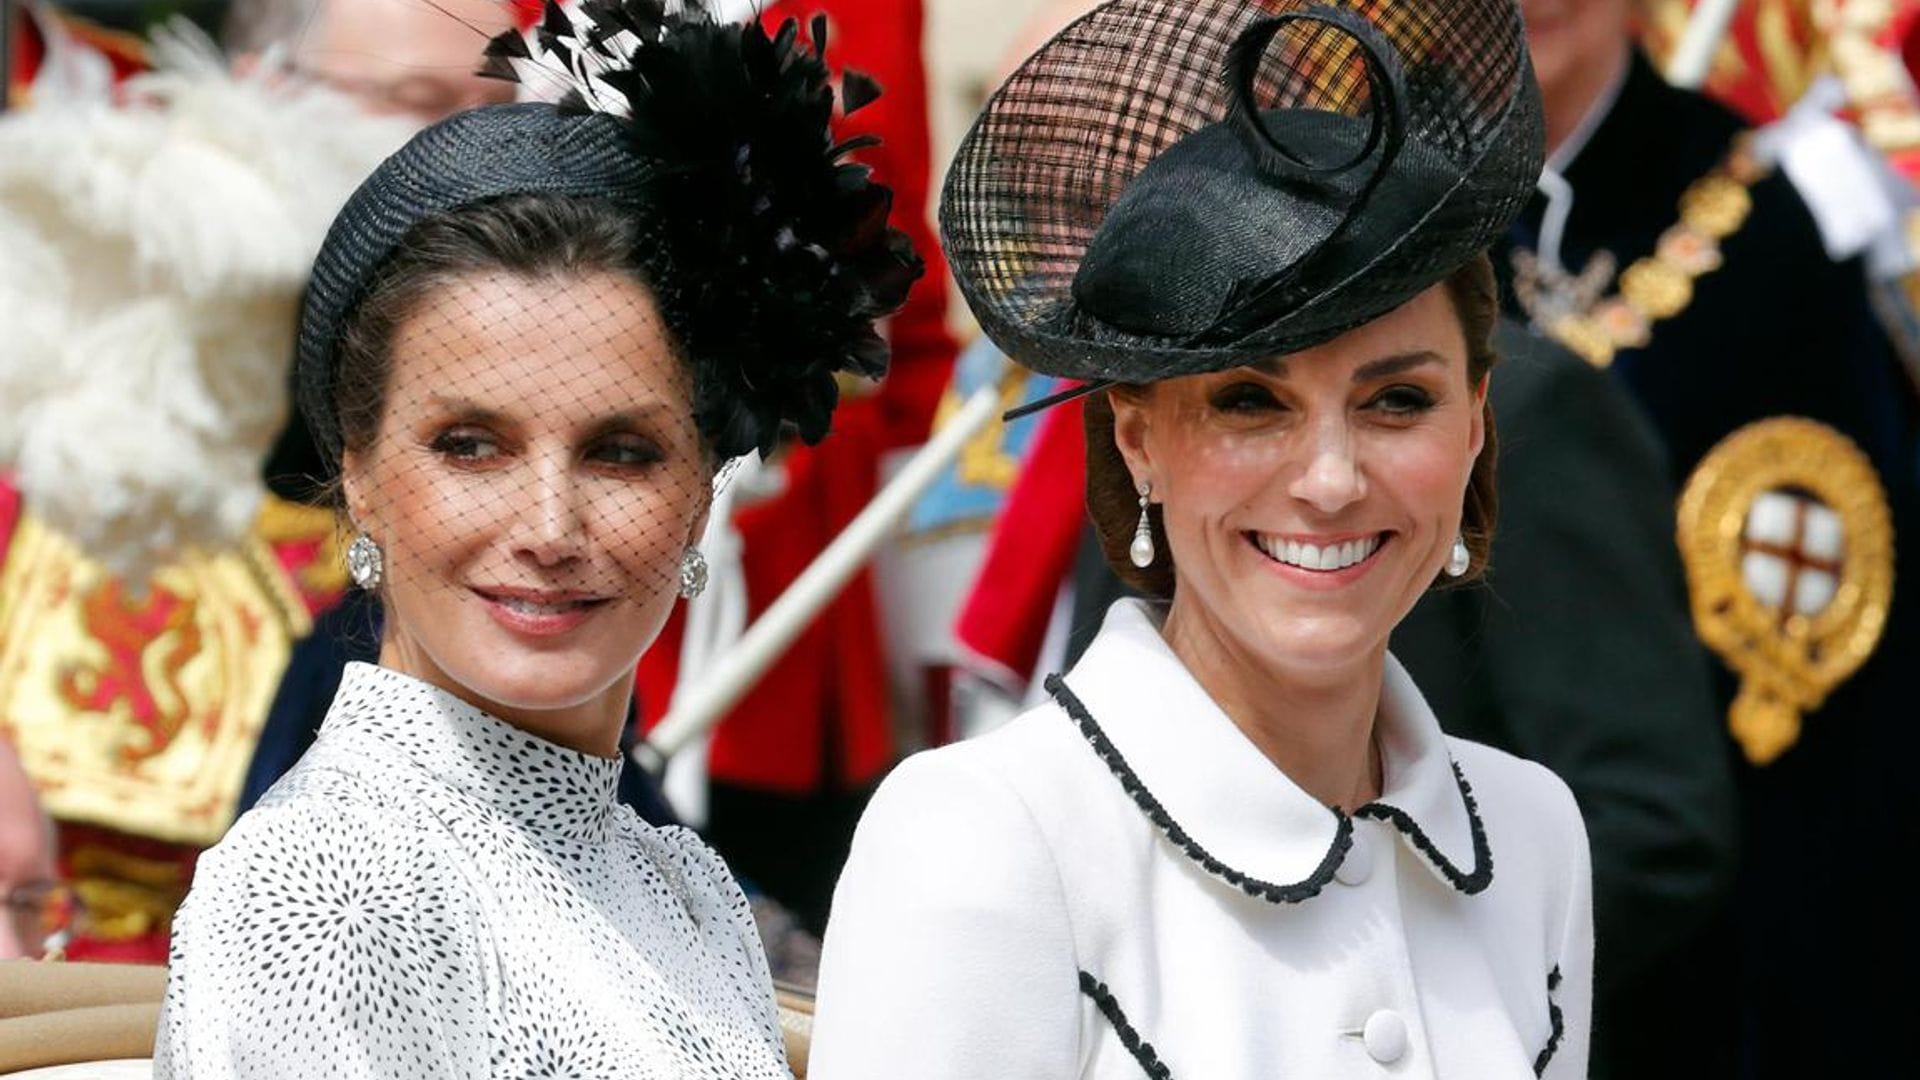 Queen Letizia channels one of Kate Middleton's most iconic looks to date